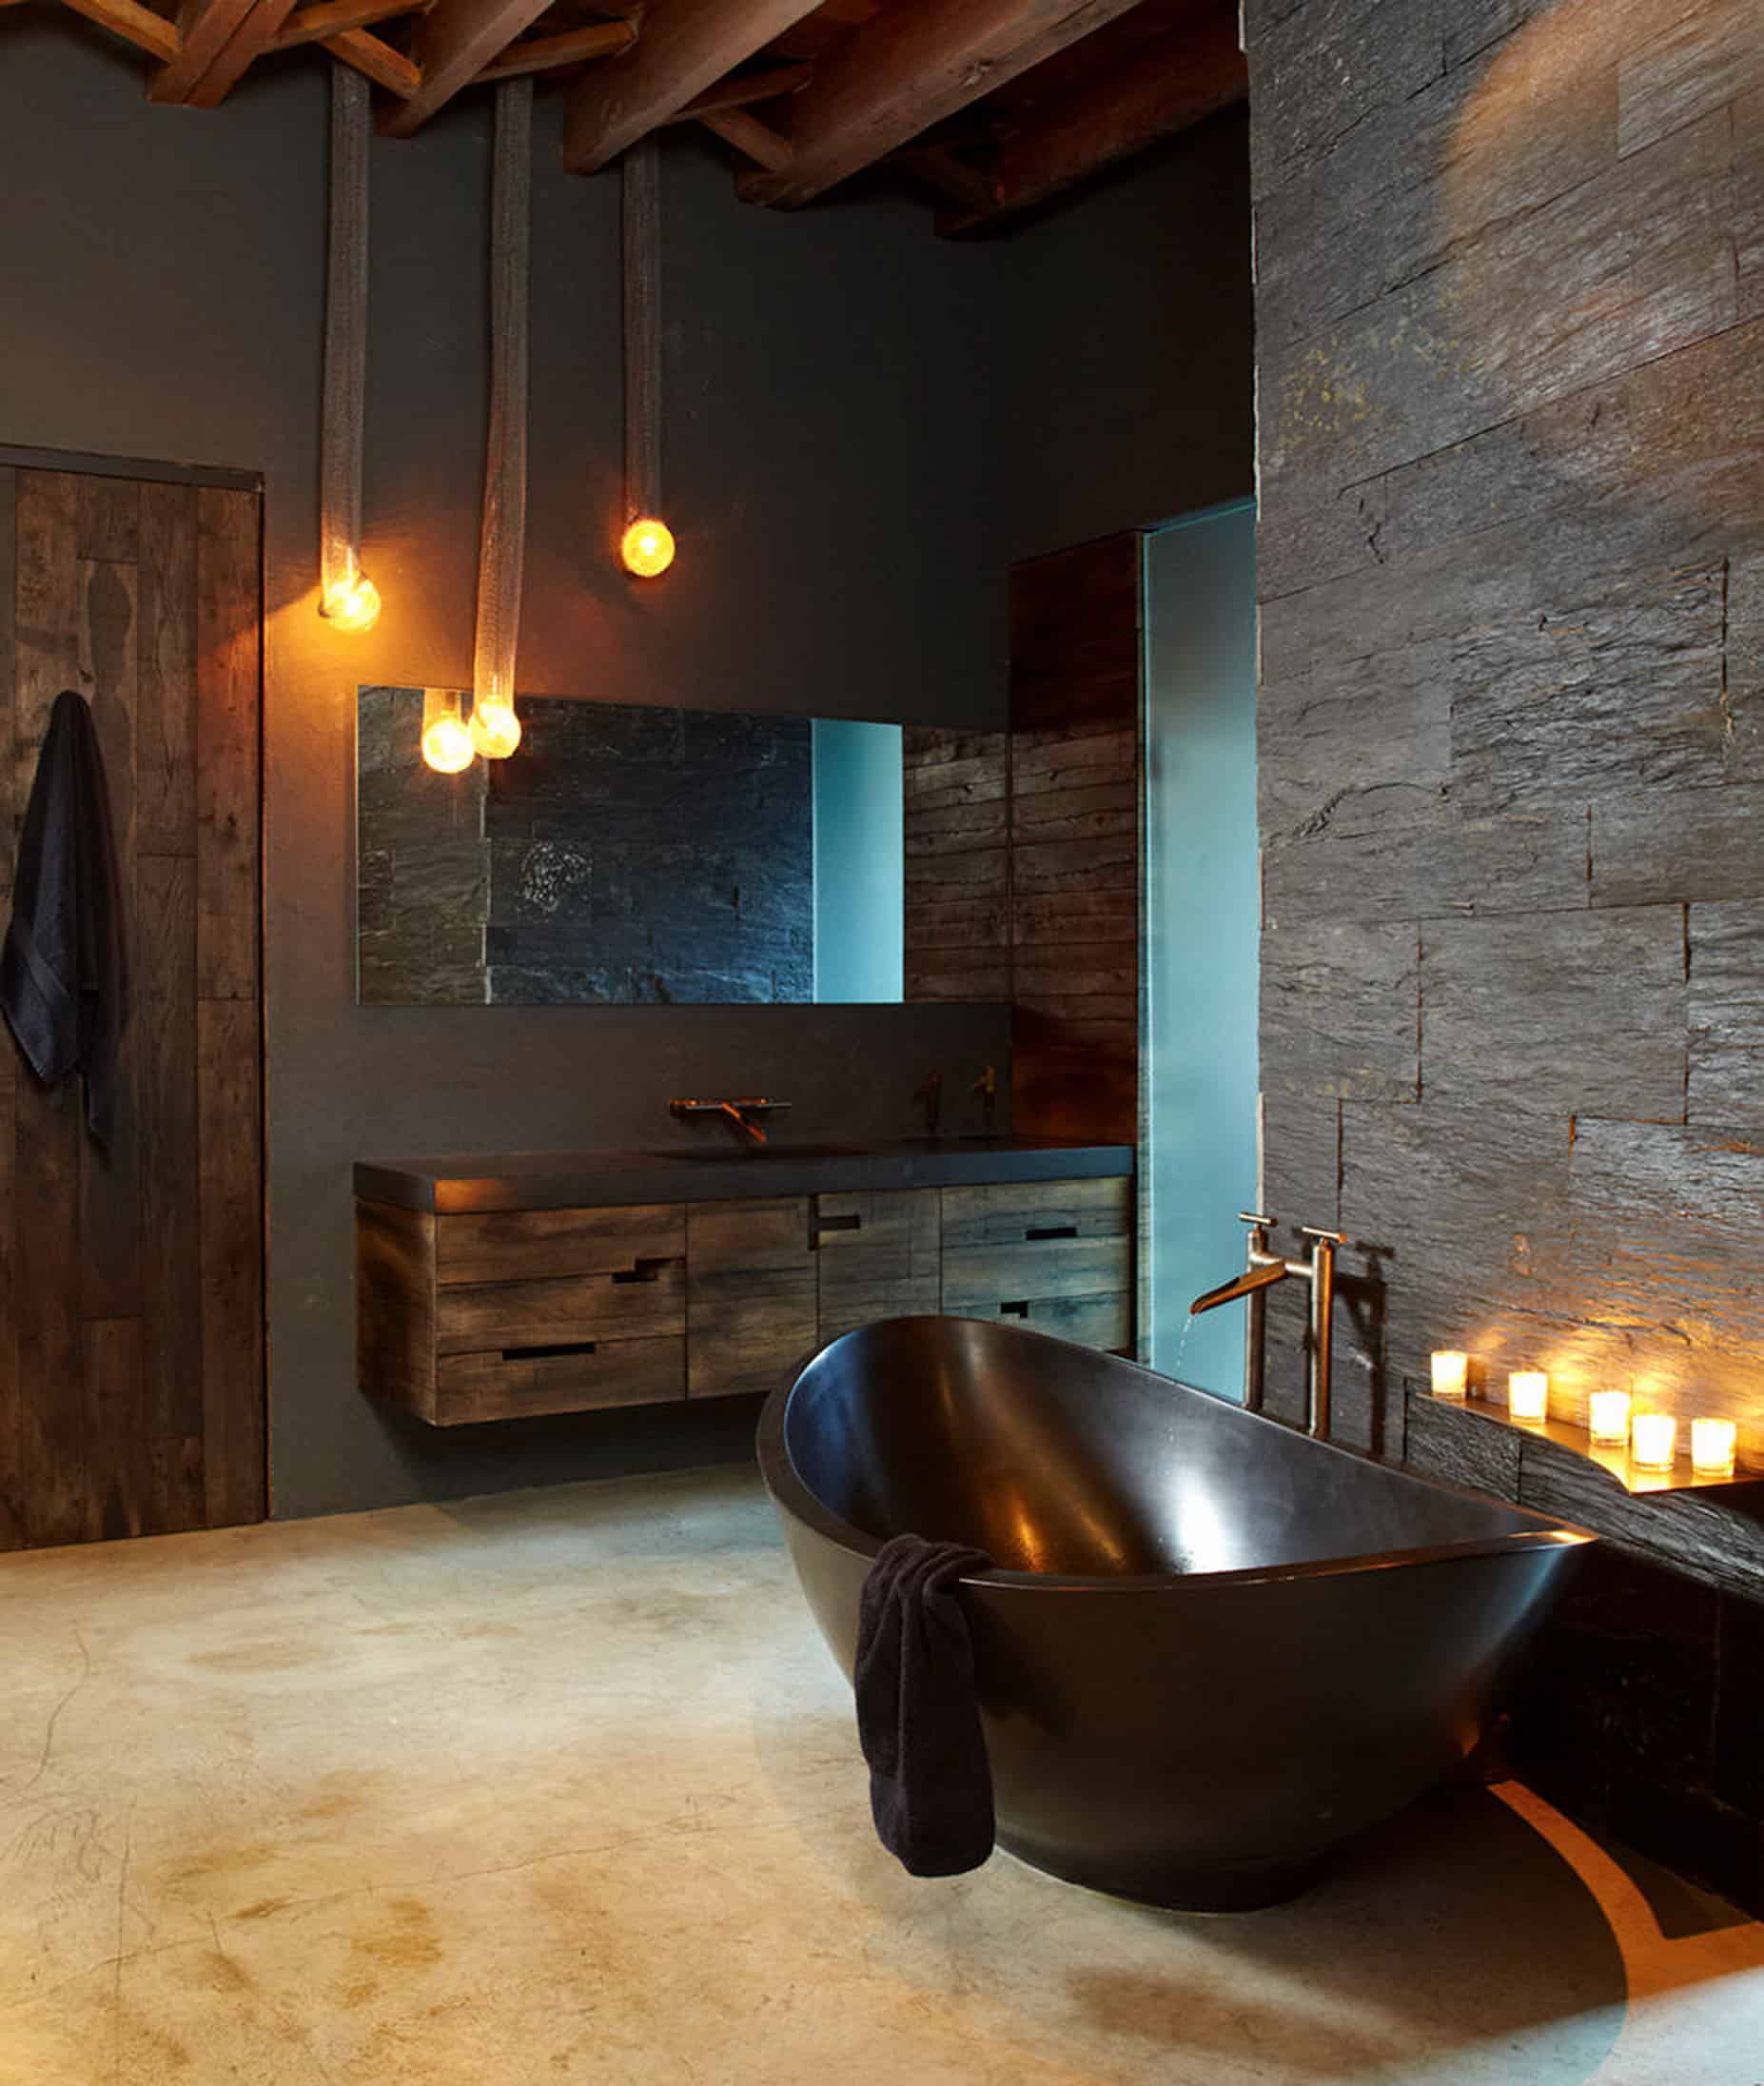 Masculine lighting is a top favorite of ours because it just gives the bathroom a sexy vibe